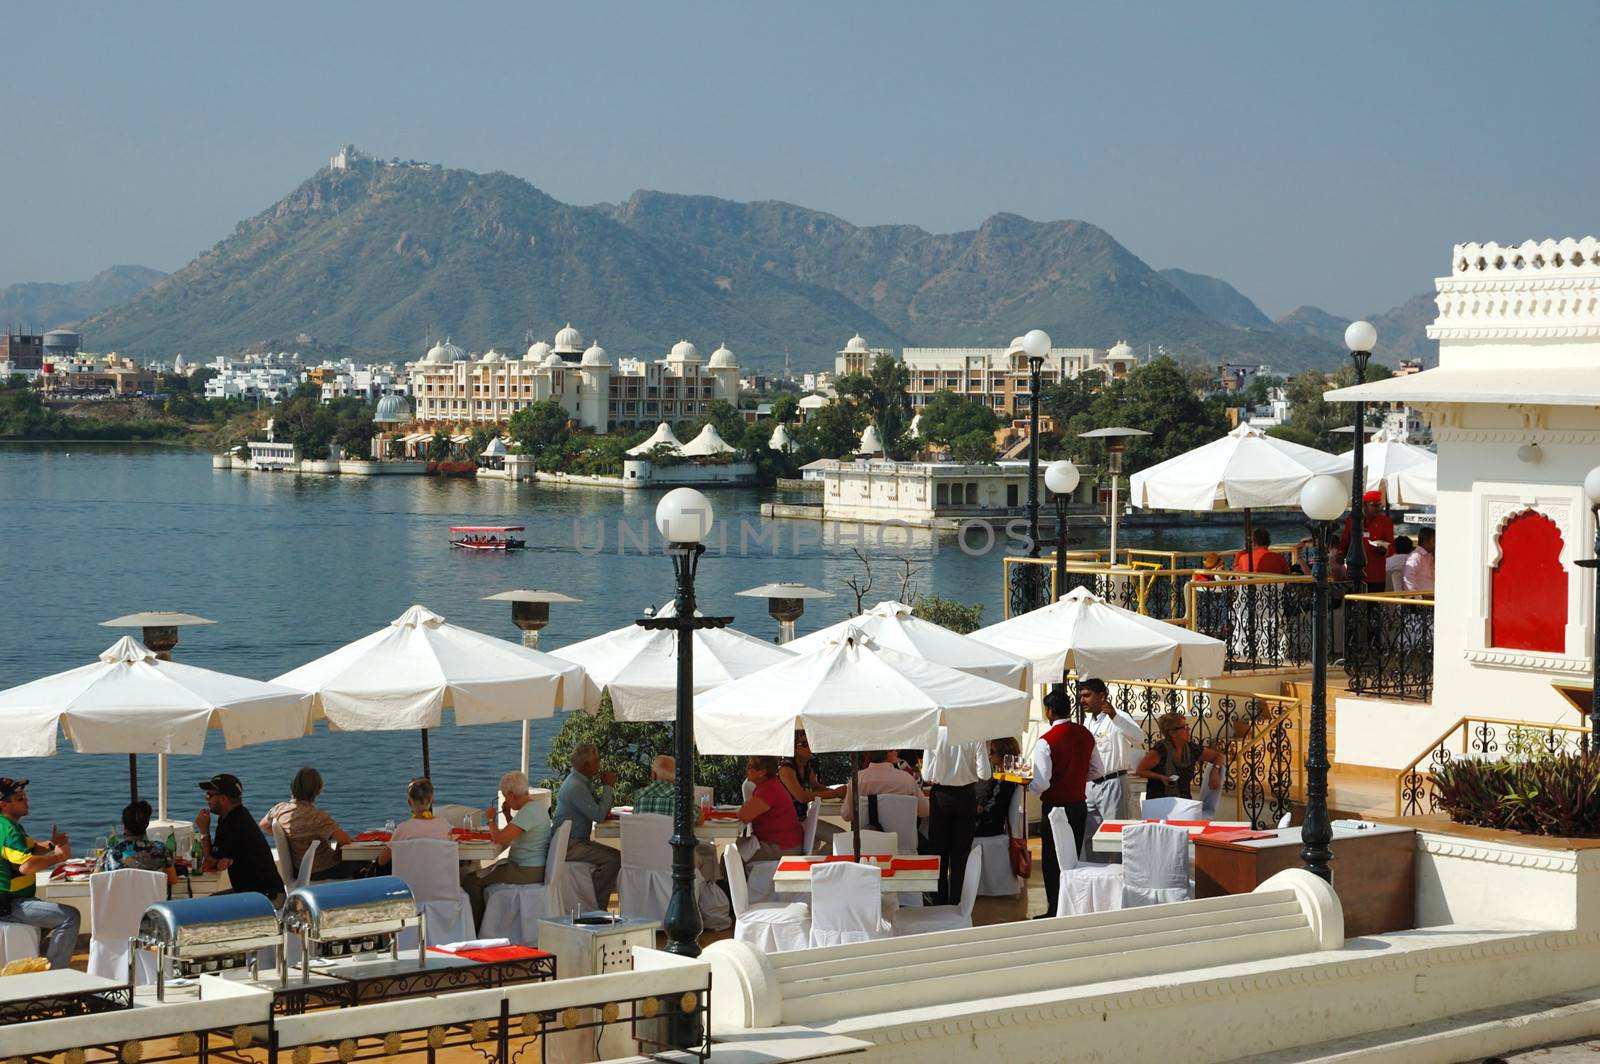 UDAIPUR,RAJASTHAN,INDIA - NOVEMBER 19: tourists enjoying the beautiful view of Pichola lake at restaurant on the embankment of Udaipur city,so called "India Venice", on November 19,2012 in Udaipur,Rajasthan,Ukraine